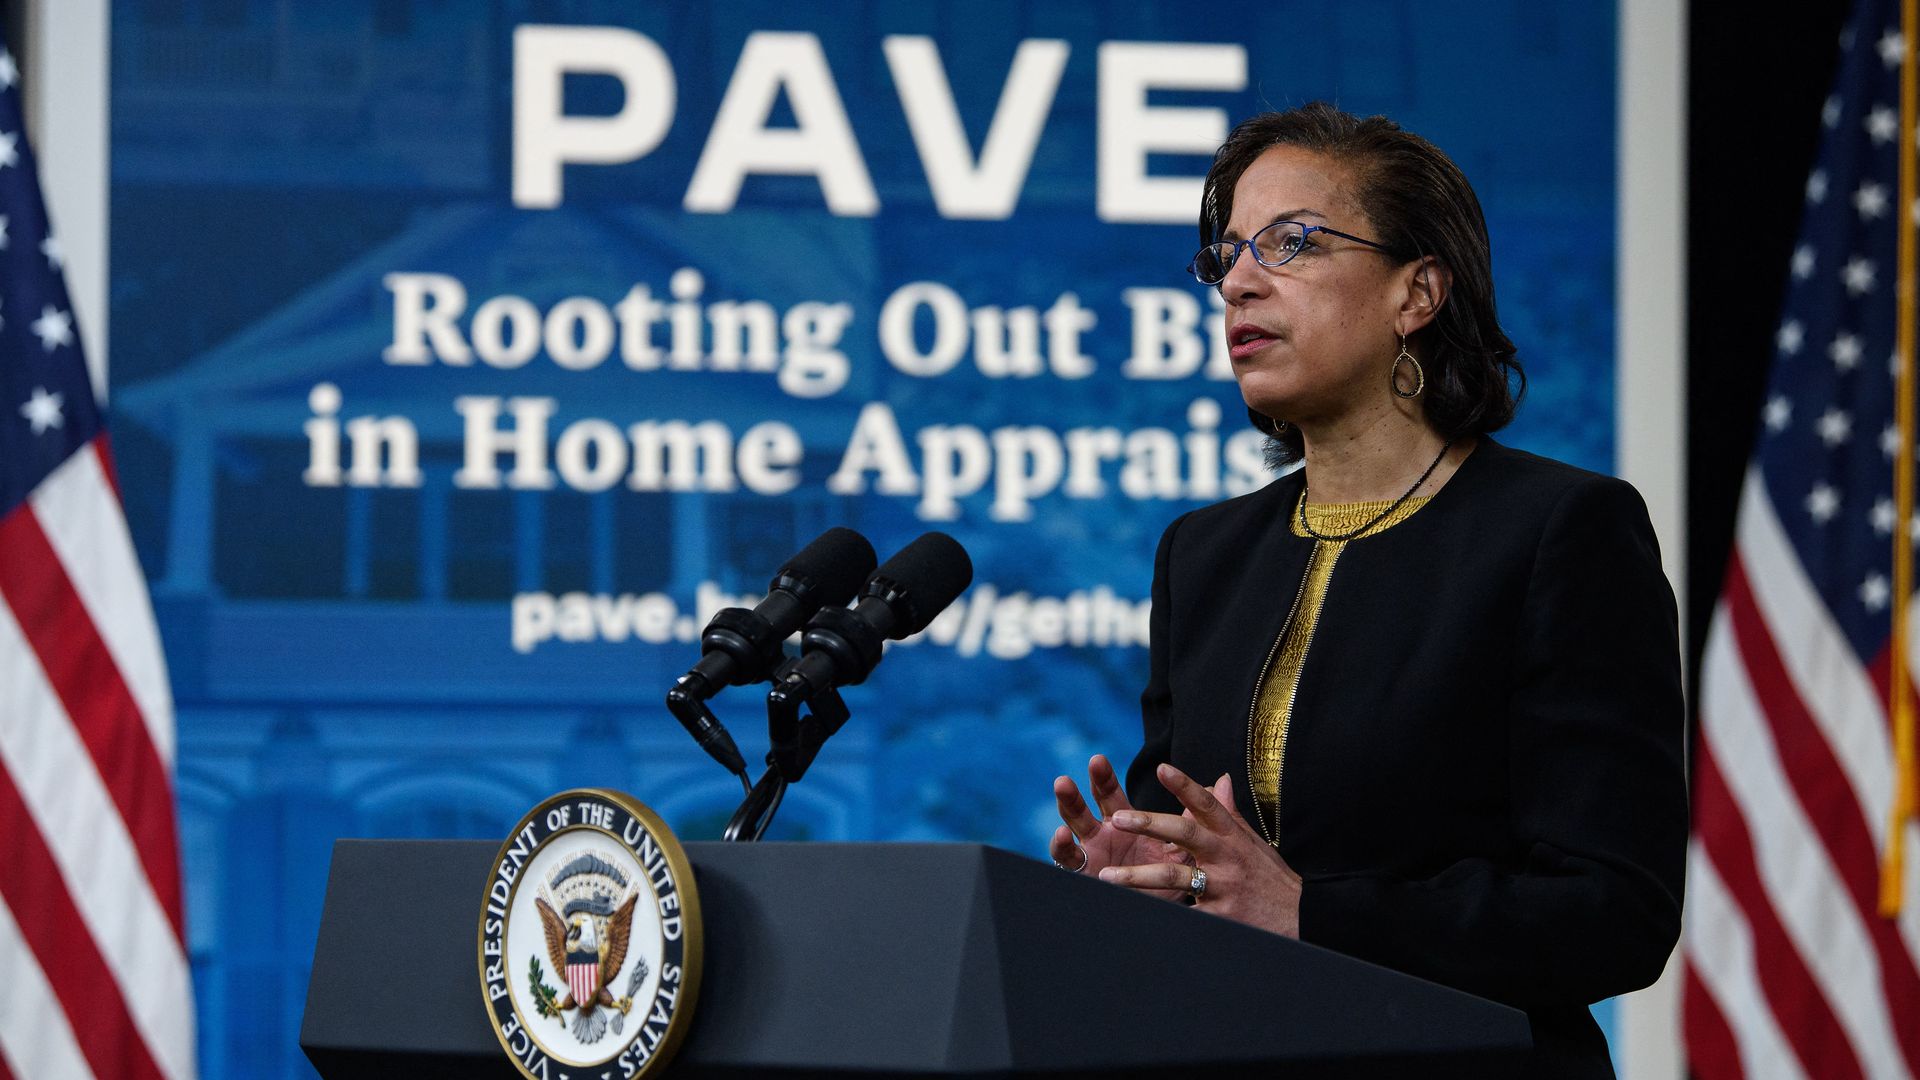 Susan Rice, Director of the US Domestic Policy Council, speaks during the rollout of the Property Appraisals and Valuation Equity (PAVE) task force to combat racial and ethnic bias in property valuations at the White House in Washington, DC, on March 23, 2022. 